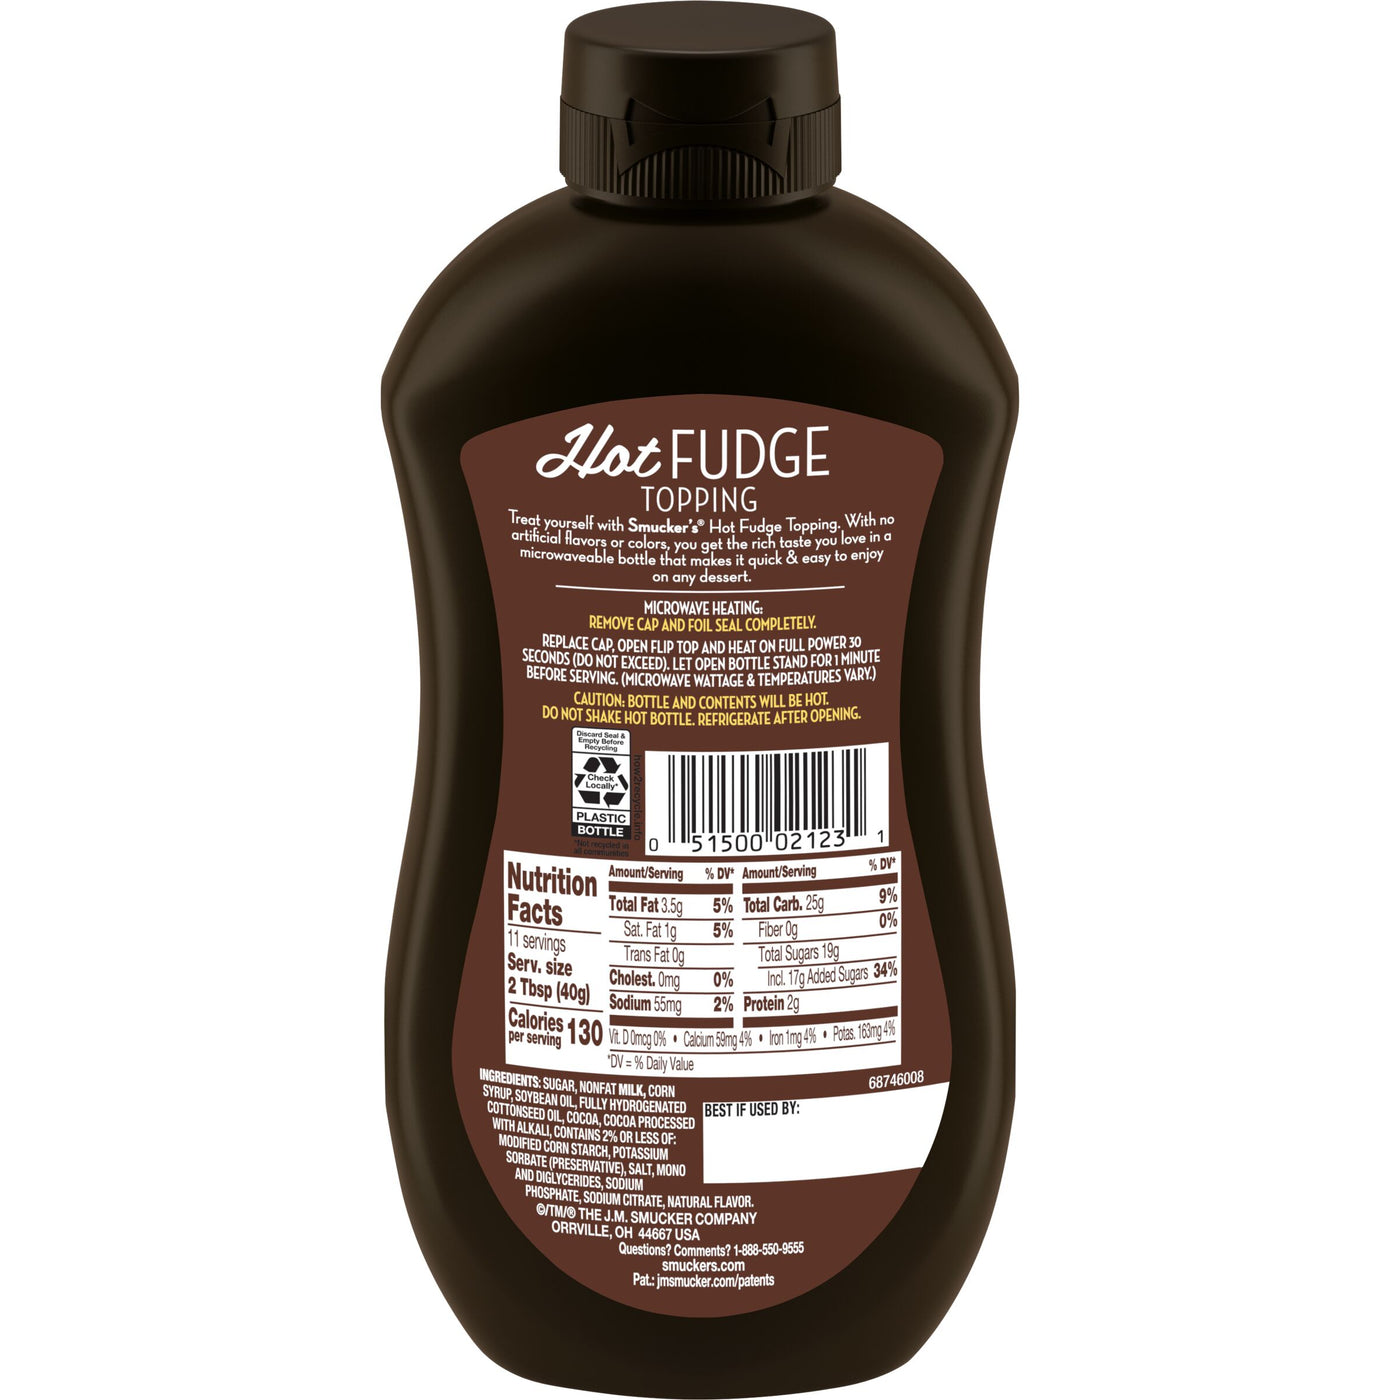 Smucker's Hot Fudge Topping, Microwavable Squeeze Bottle, 15.5 oz